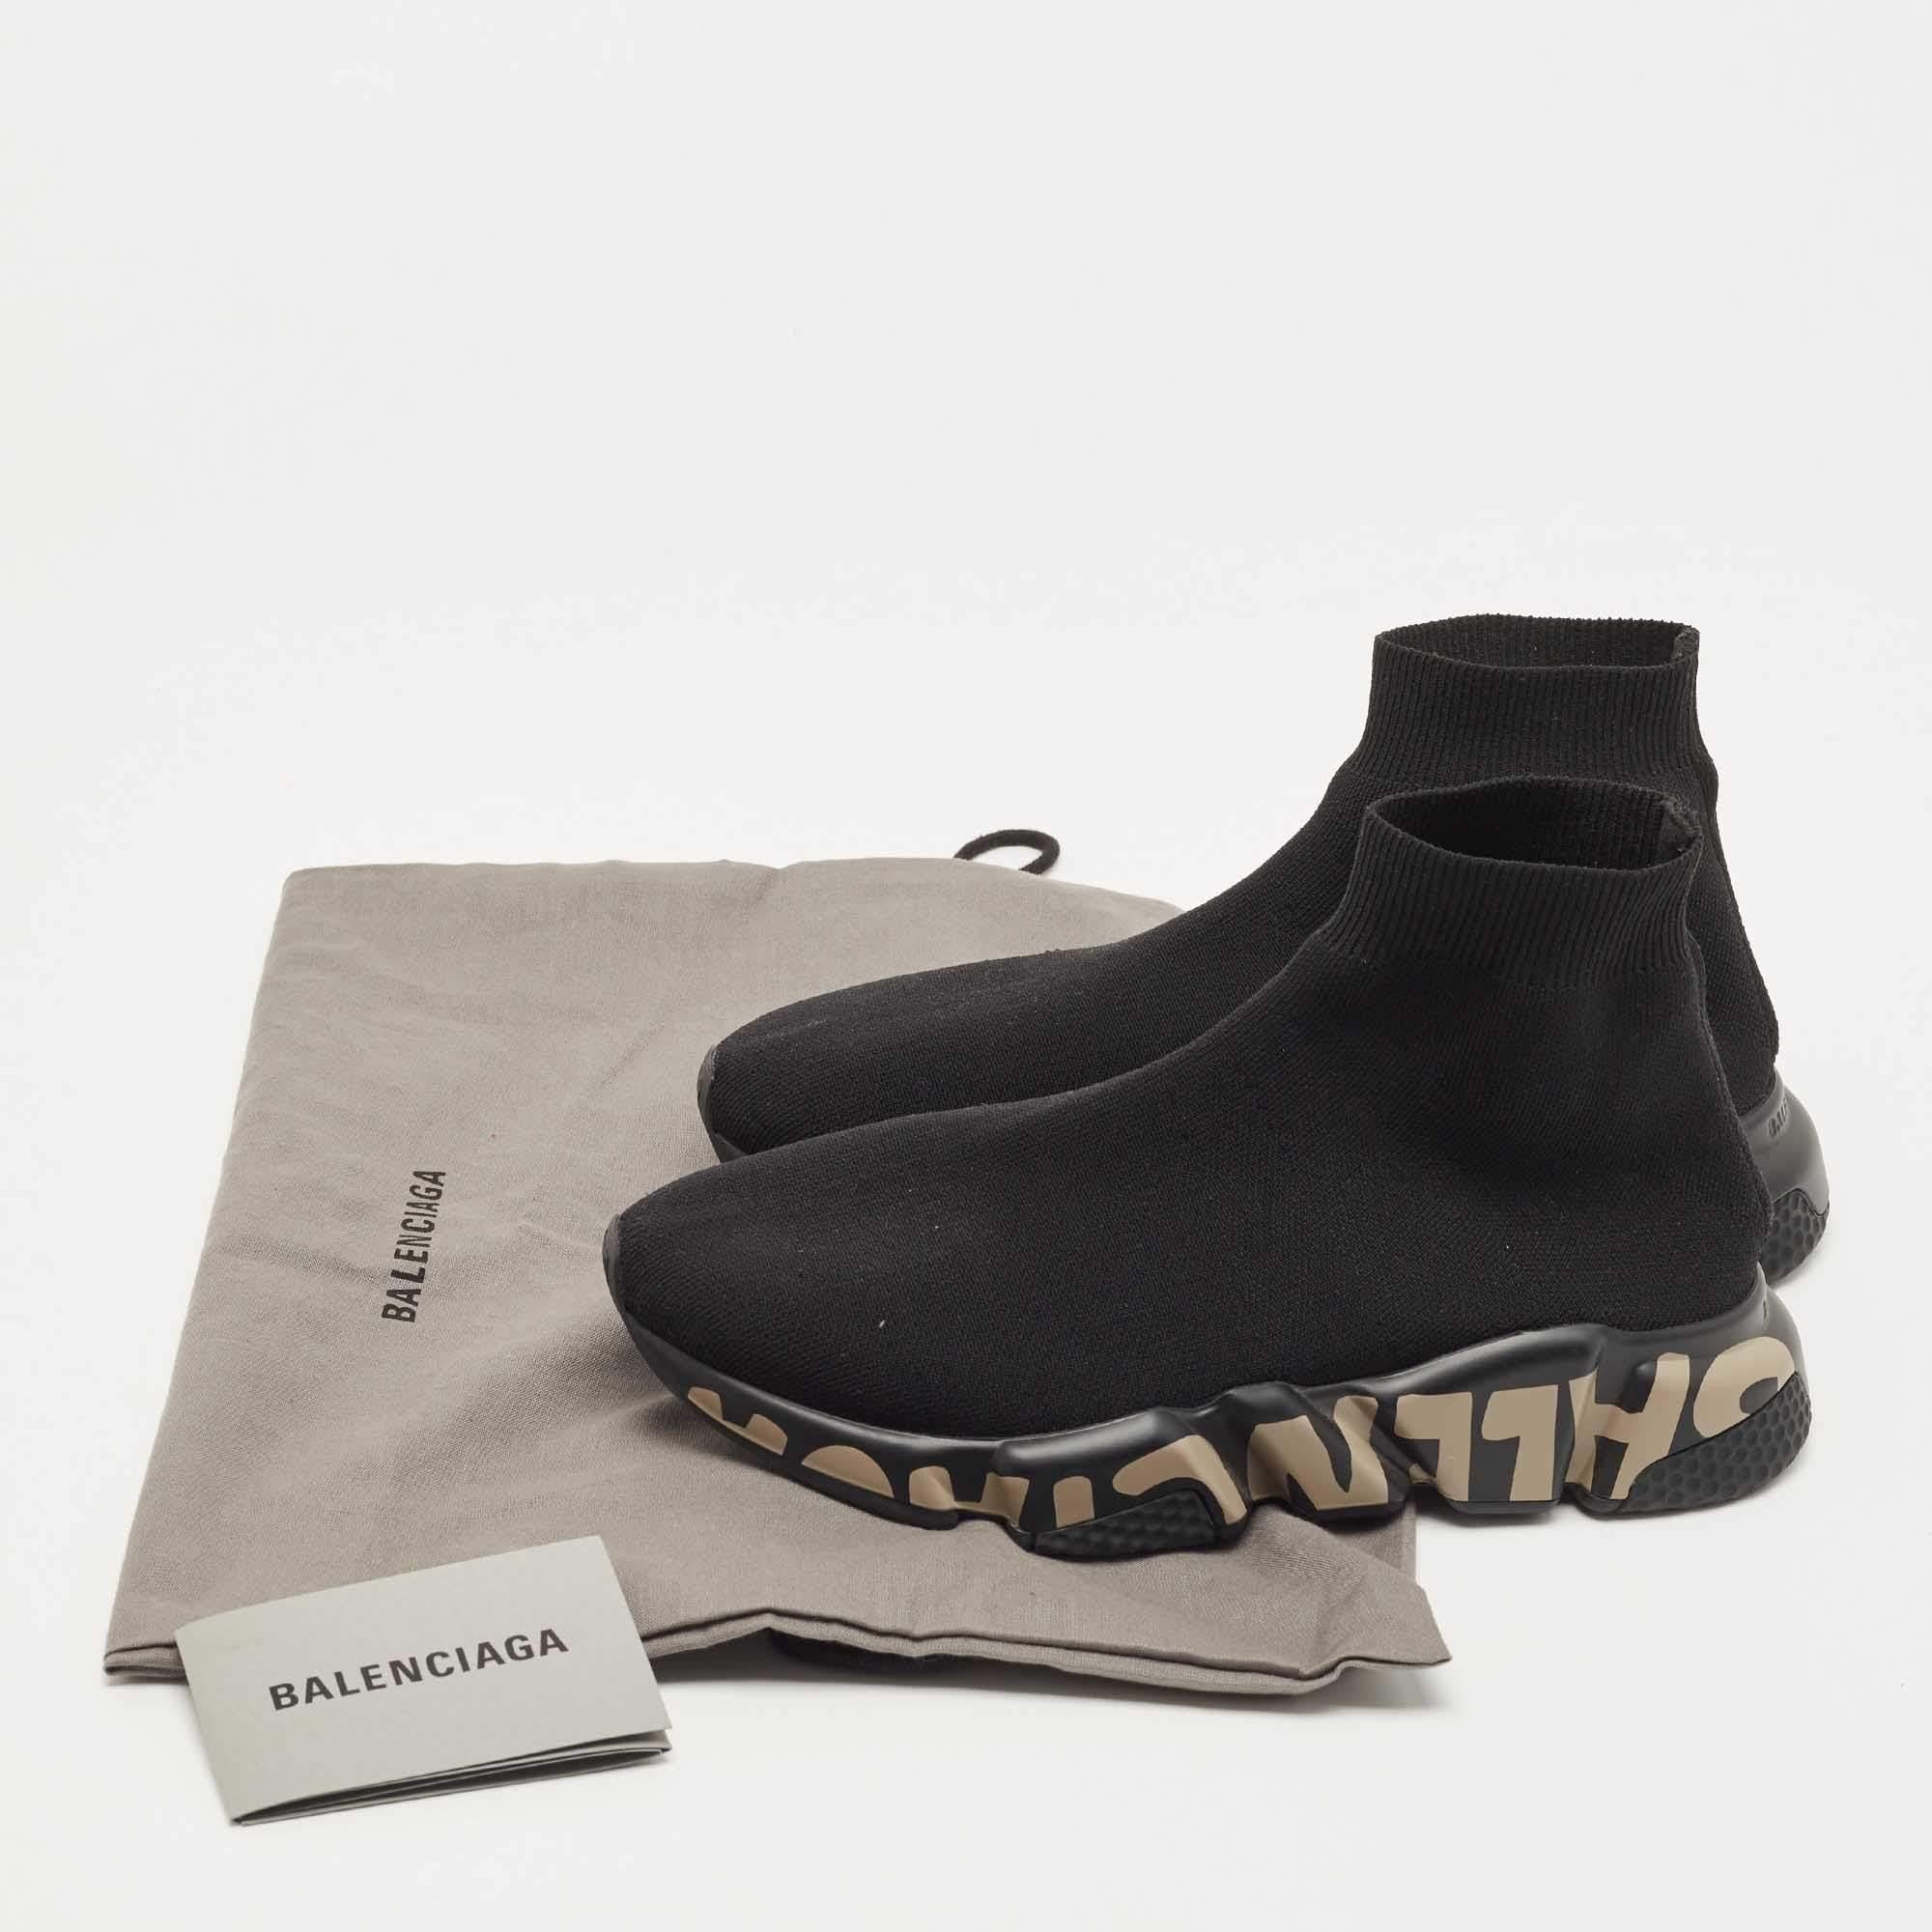 Balenciaga Black Knit Fabric Speed Trainer Sneakers  5